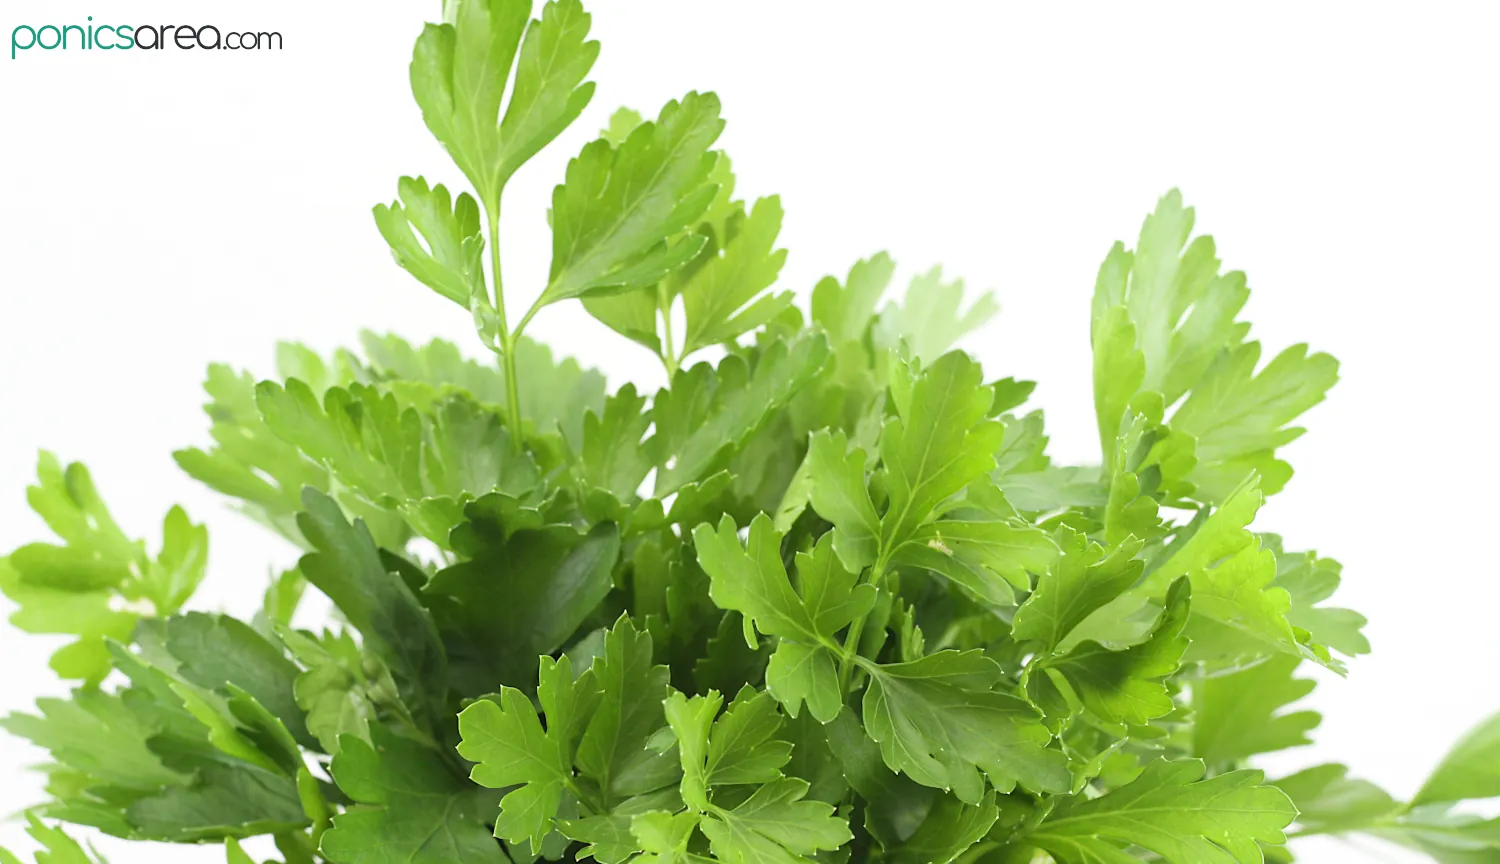 characteristics of the parsley plant